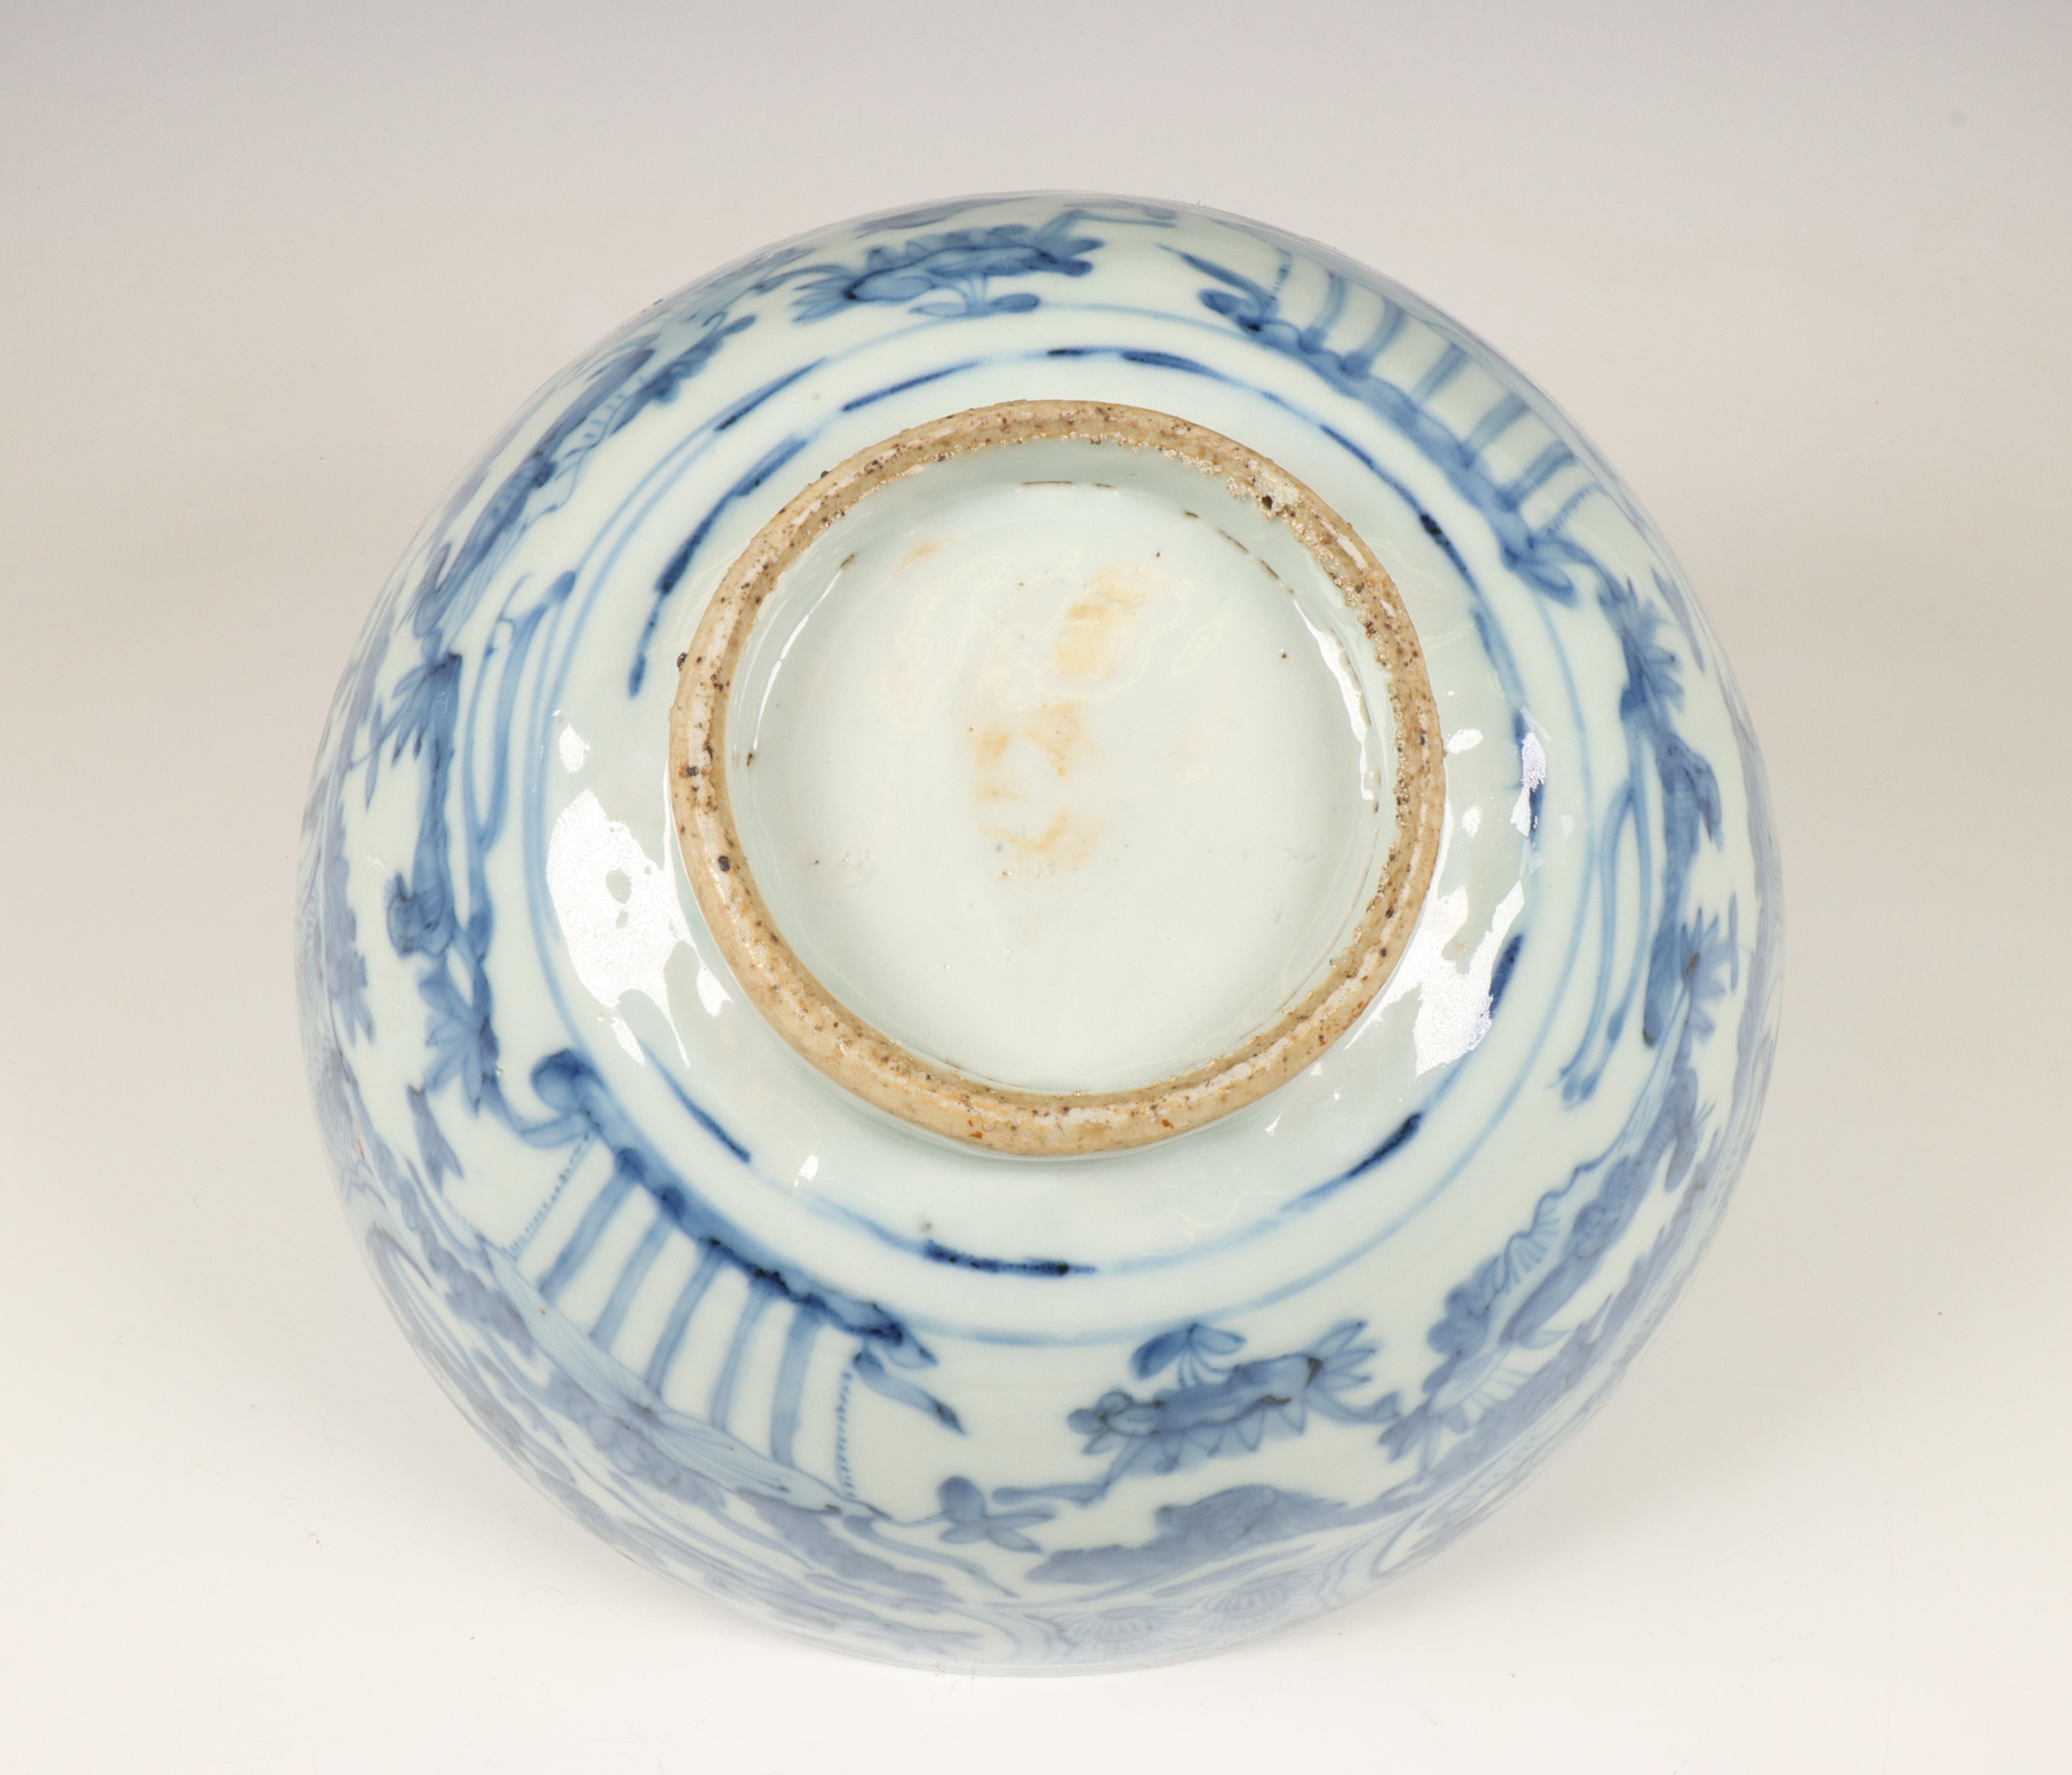 China, a blue and white porcelain bowl, late Ming dynasty (1368-1644), - Image 6 of 11